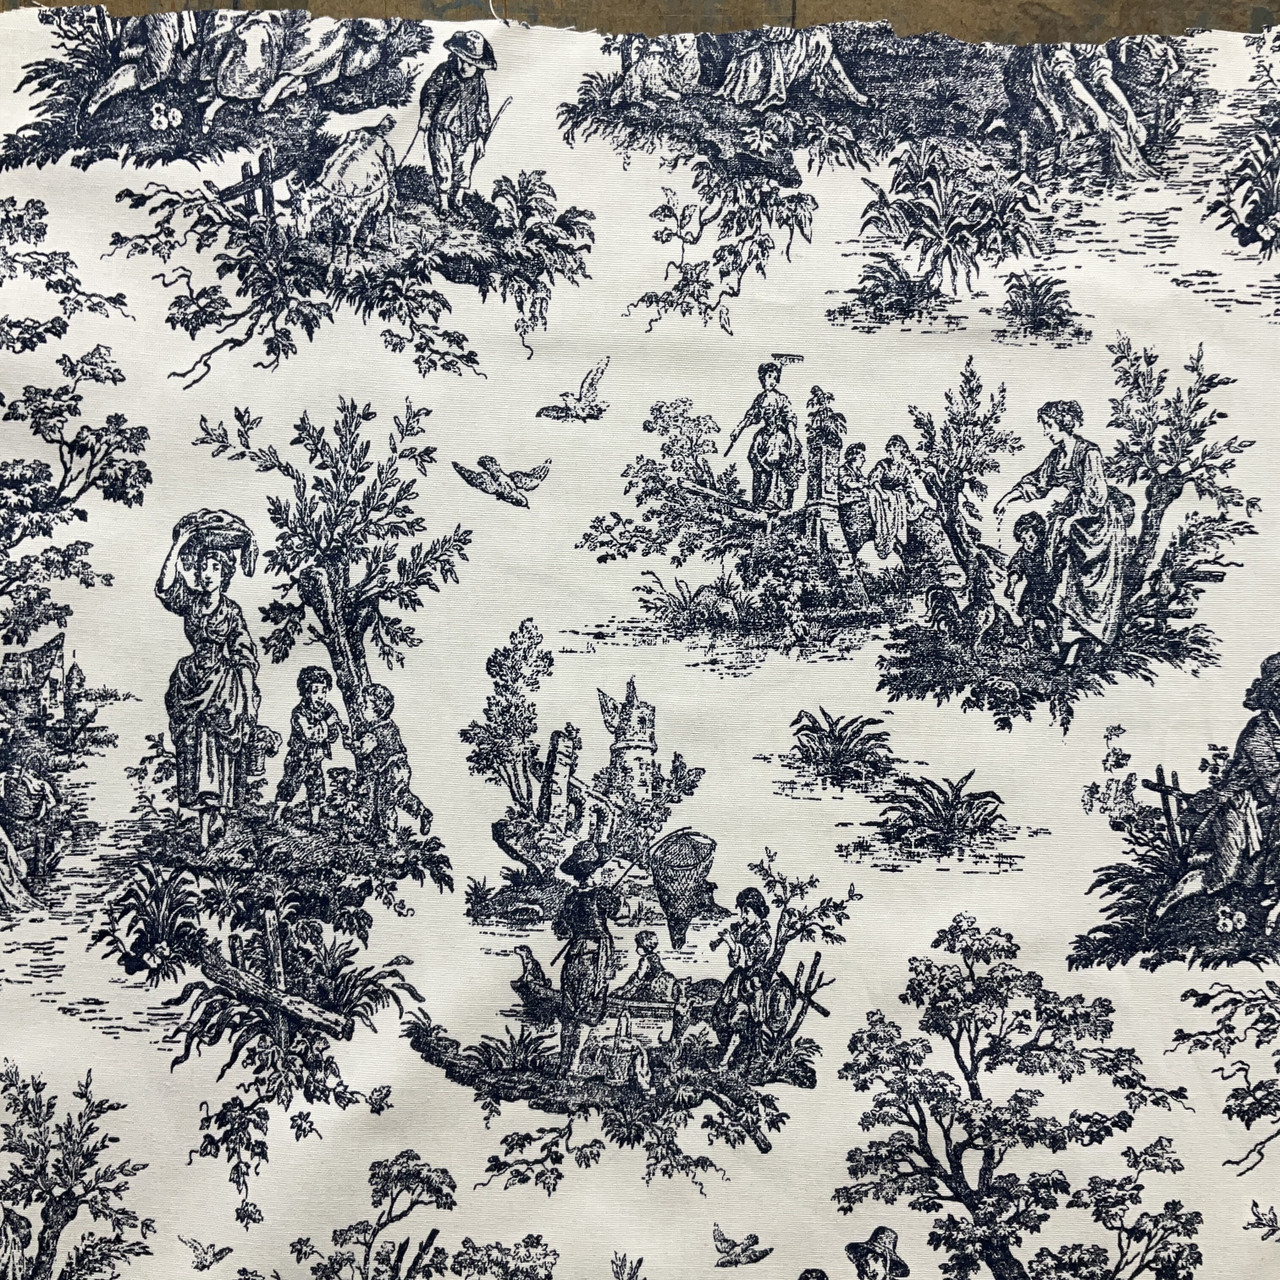 Ink Blue Jacobean Floral Toile Fabric